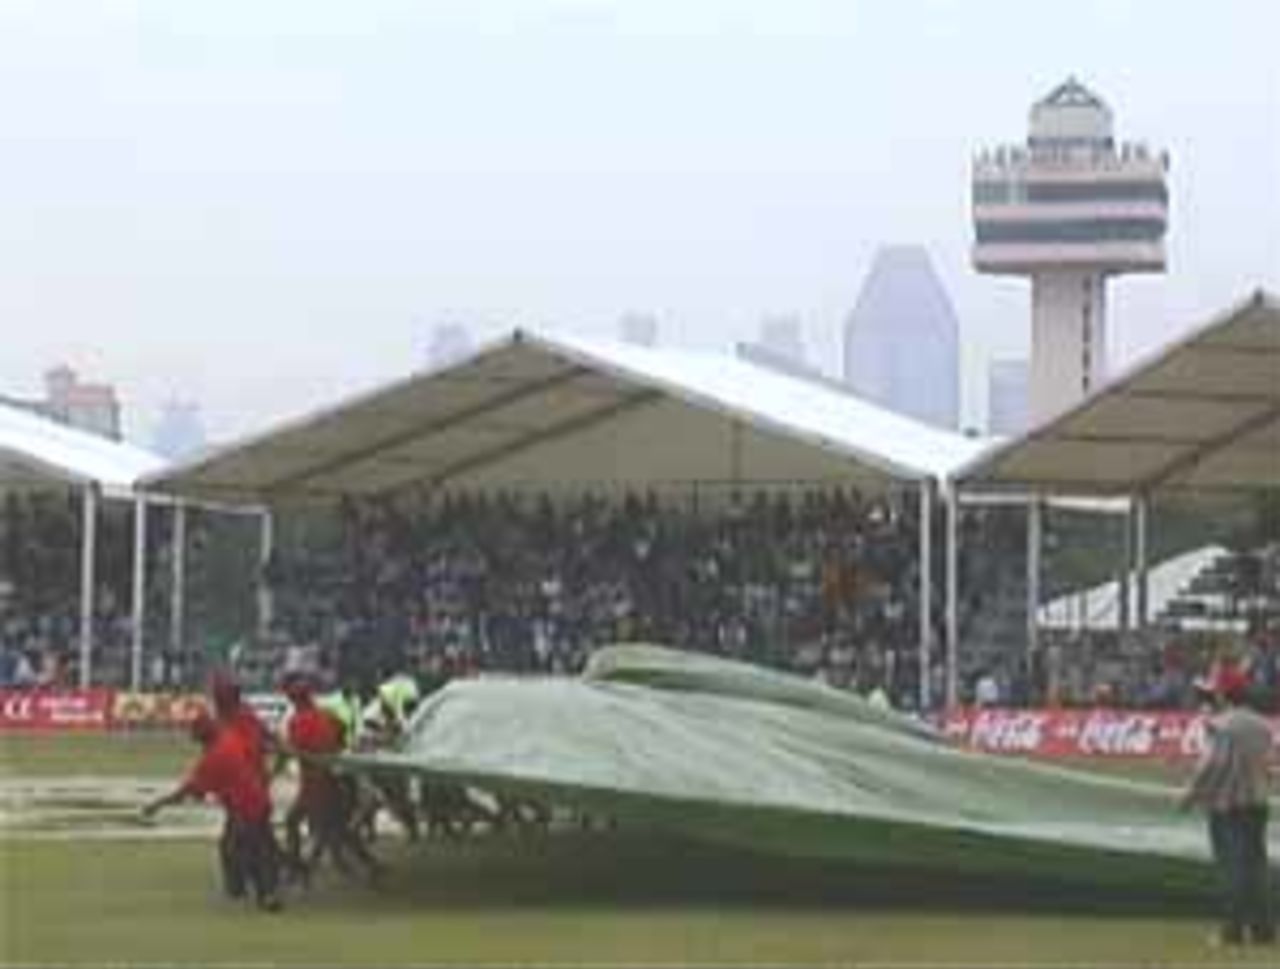 Singapore weather strikes again and the match has to be abandoned, India v West Indies (Final), Coca-Cola Singapore Challenge, 1999-2000, Kallang Ground, Singapore, 7 Sep 1999.